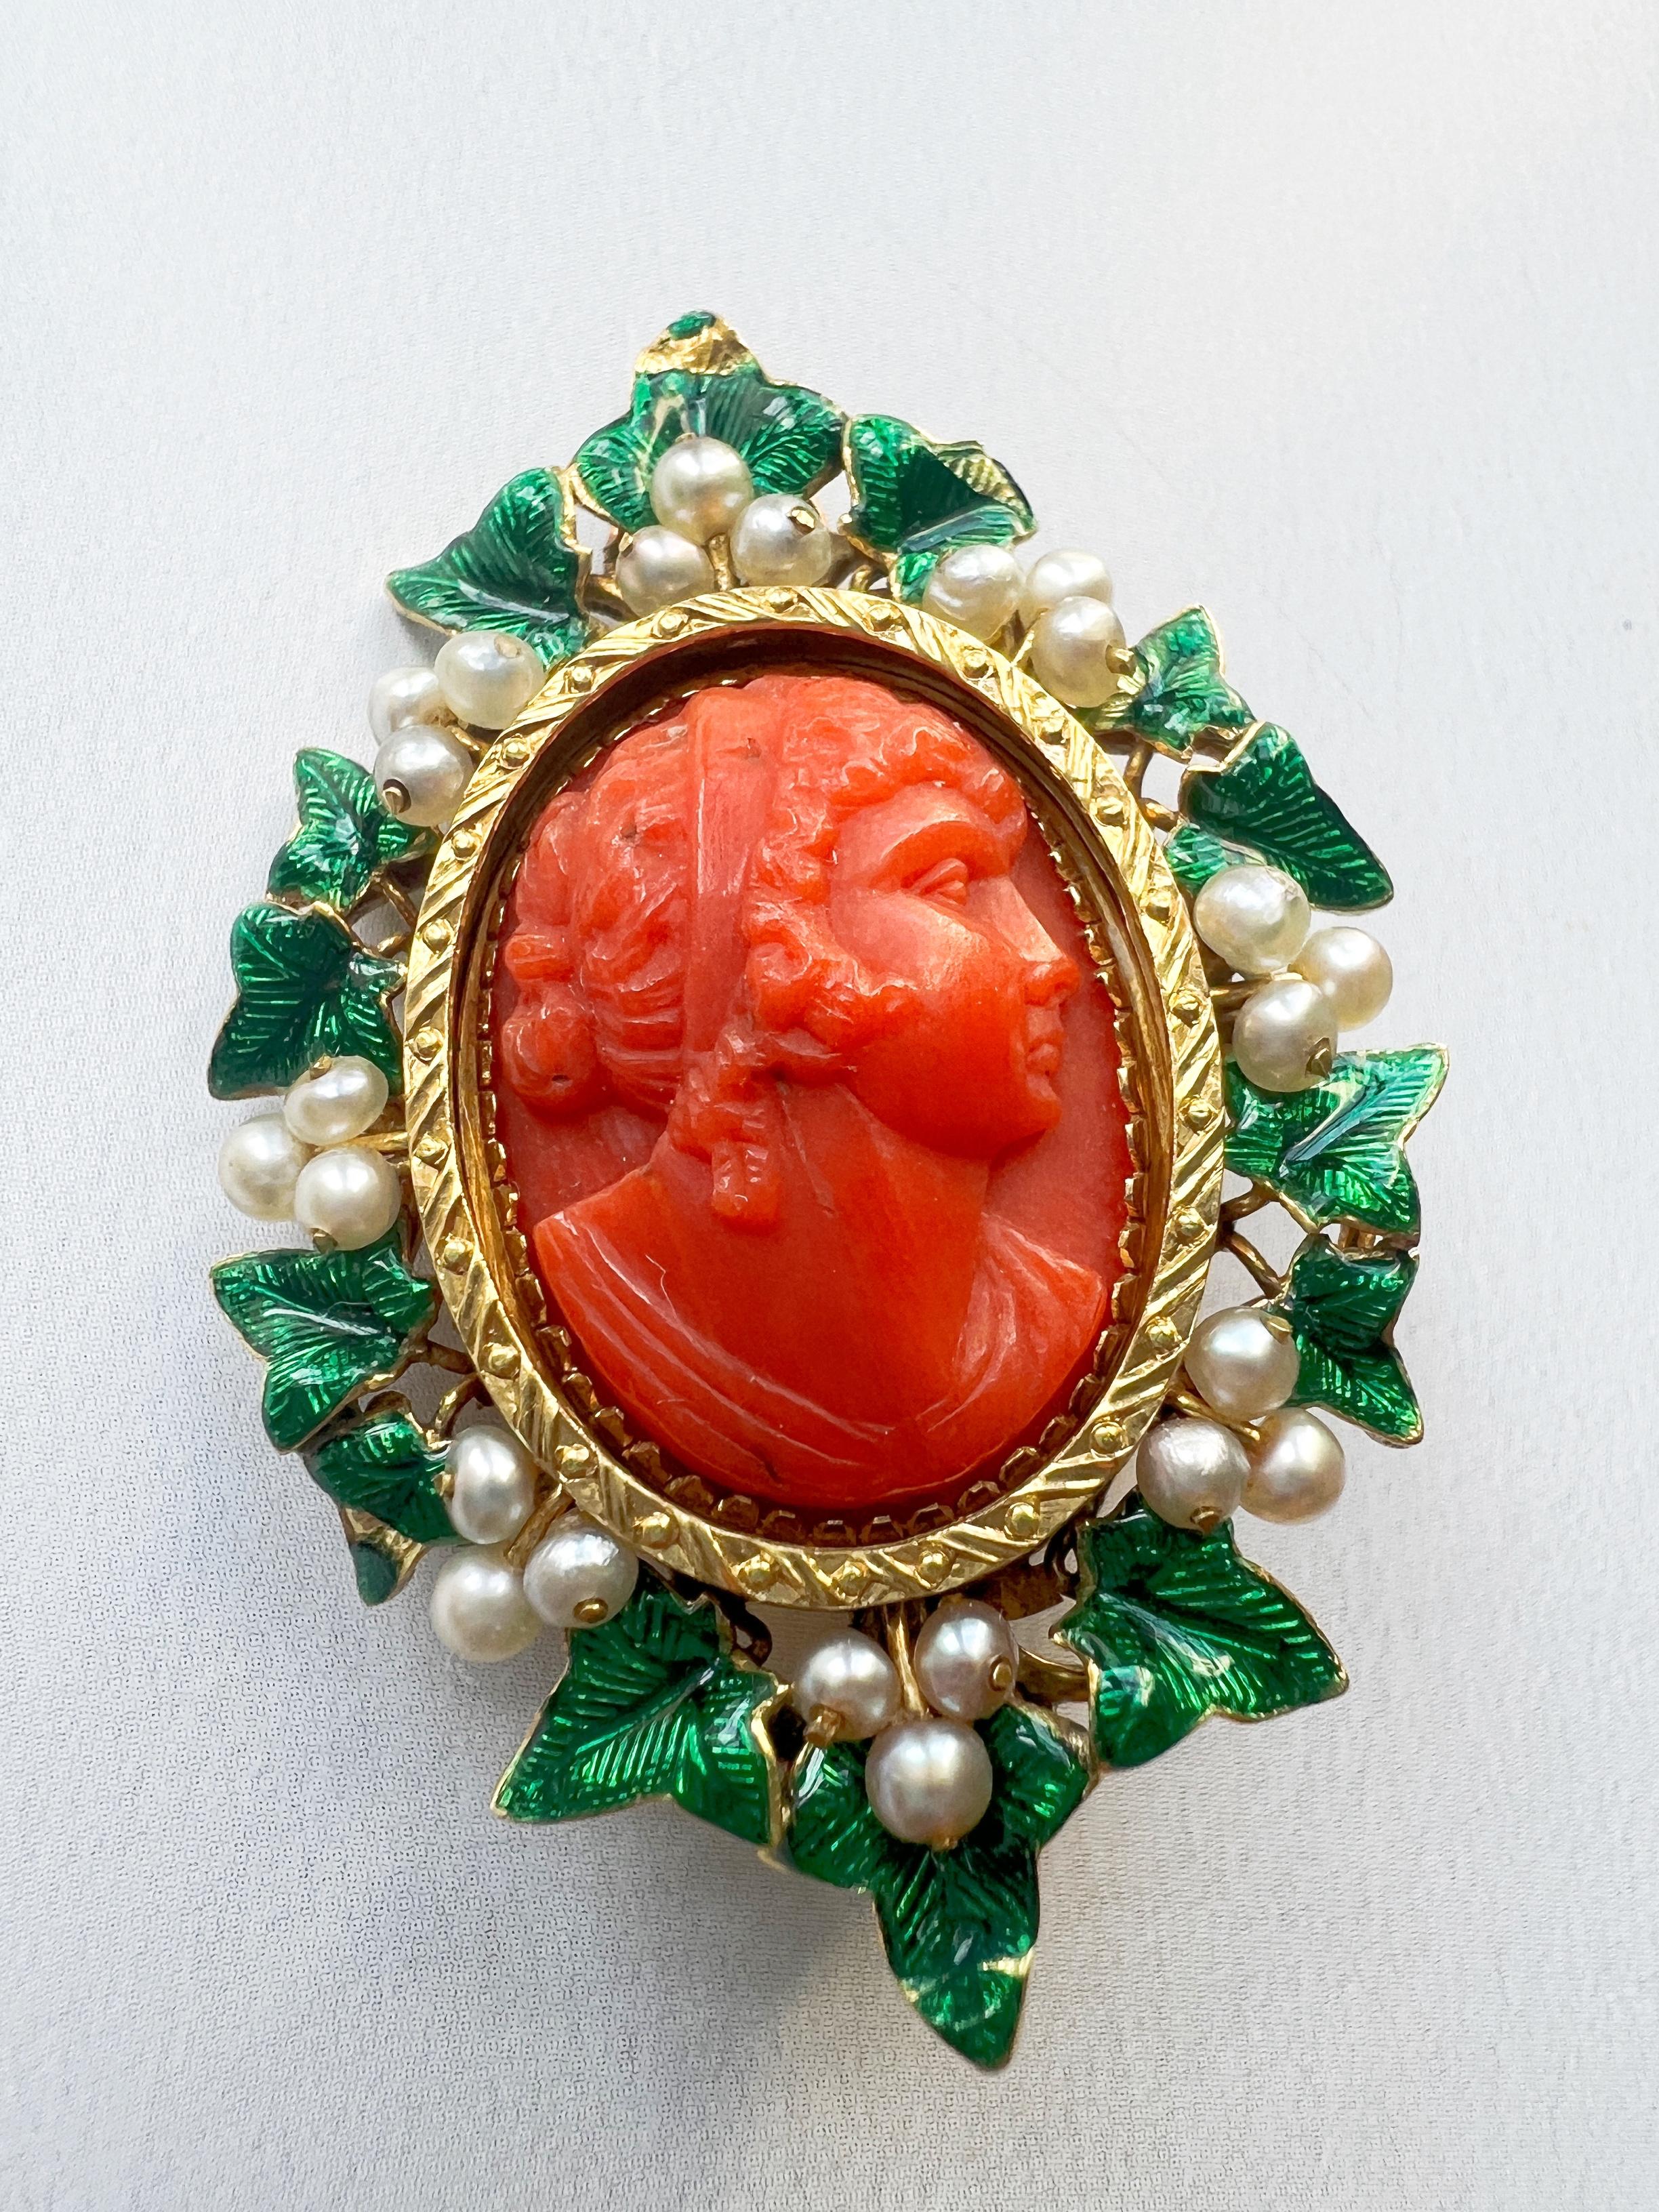 Women's or Men's Victorian 18K gold coral cameo brooch with ivy leaves and natural seed pearls